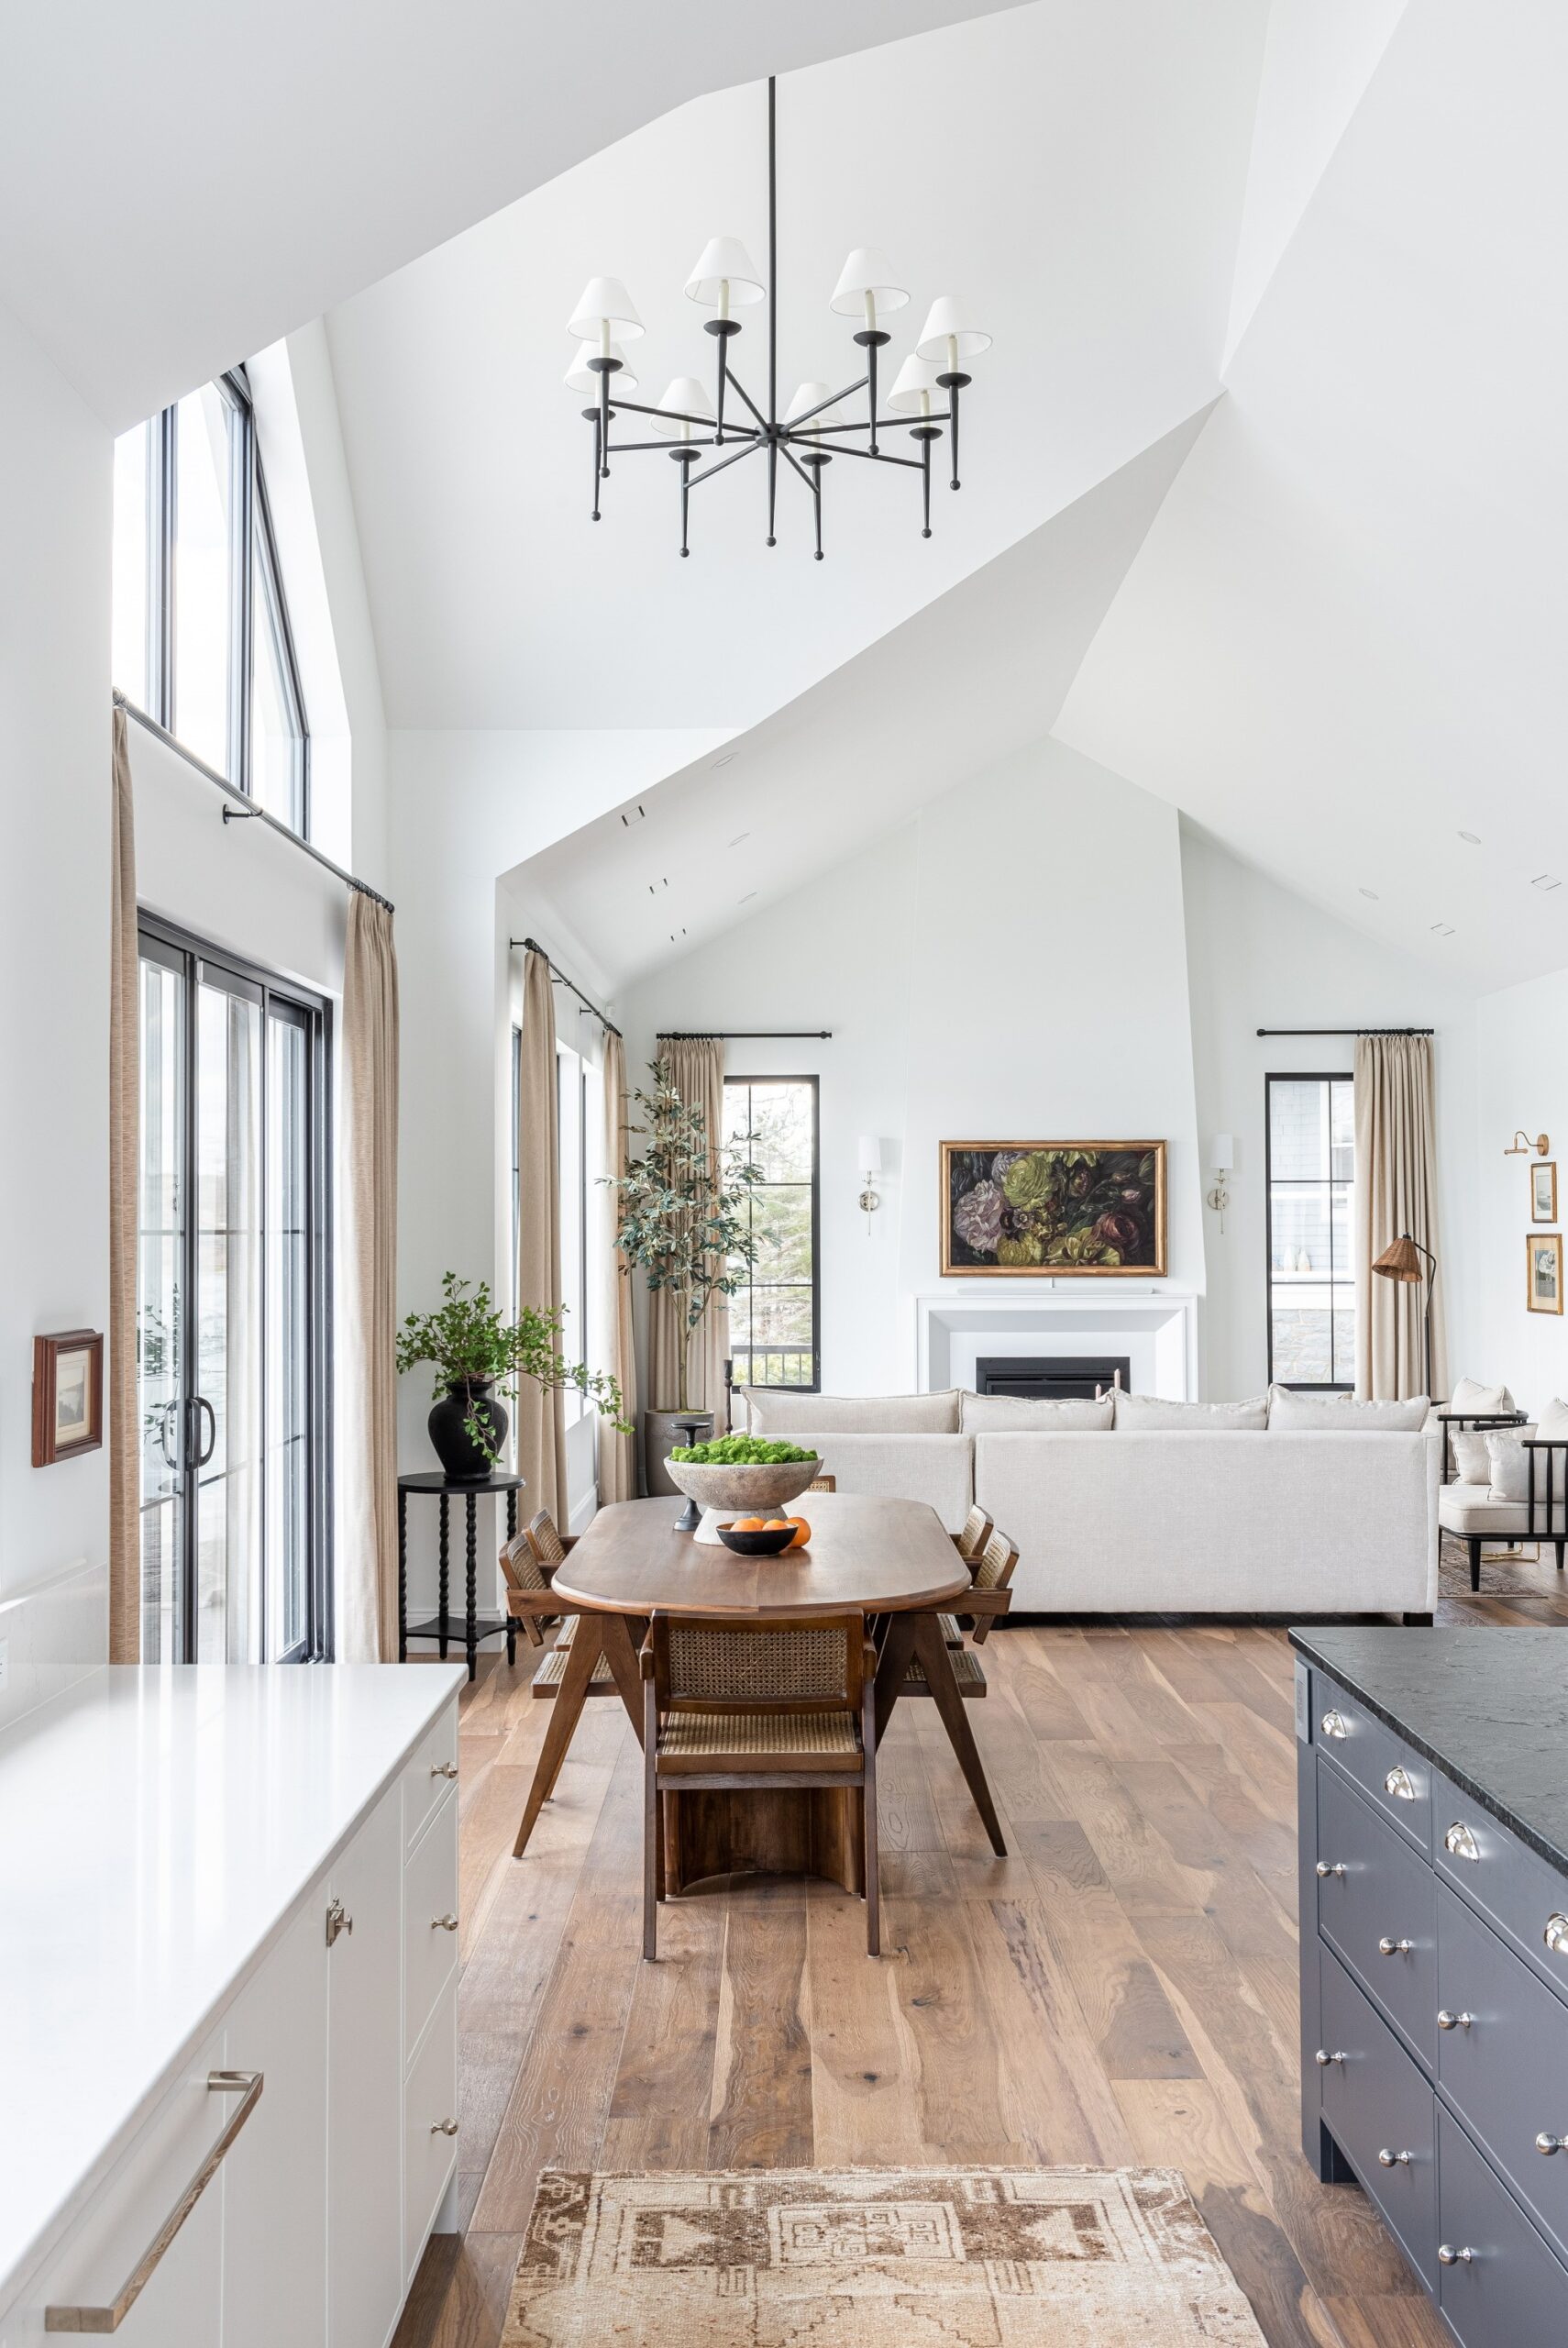 Looking from the kitchen to the casual dining and main living area, featuring Hudson Valley Lighting's London Chandelier. The black finish with white shades draws your eye upward to the high vaulted ceilings and abundant natural light